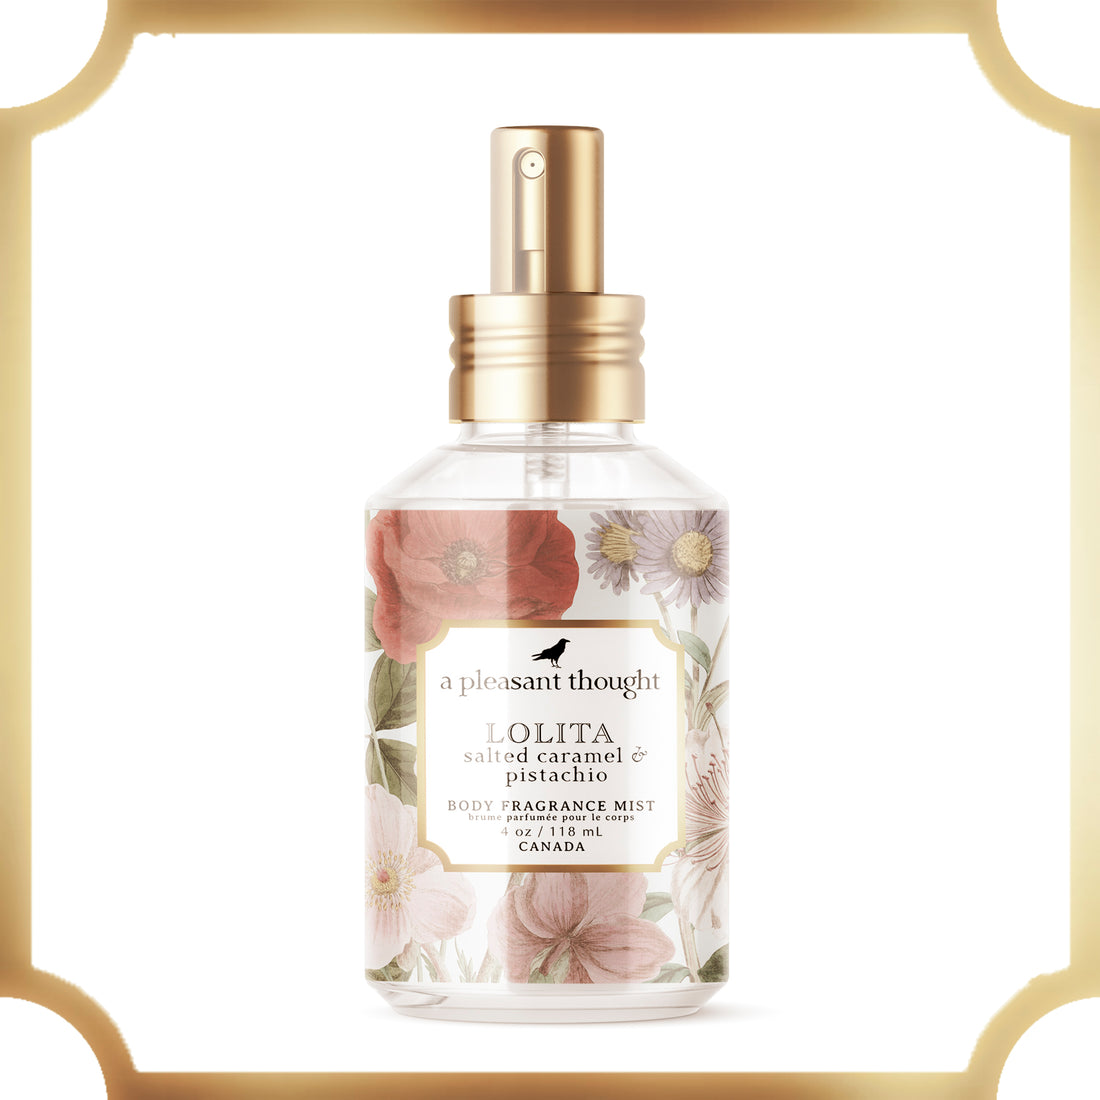  body fragrance mist a pleasant thought